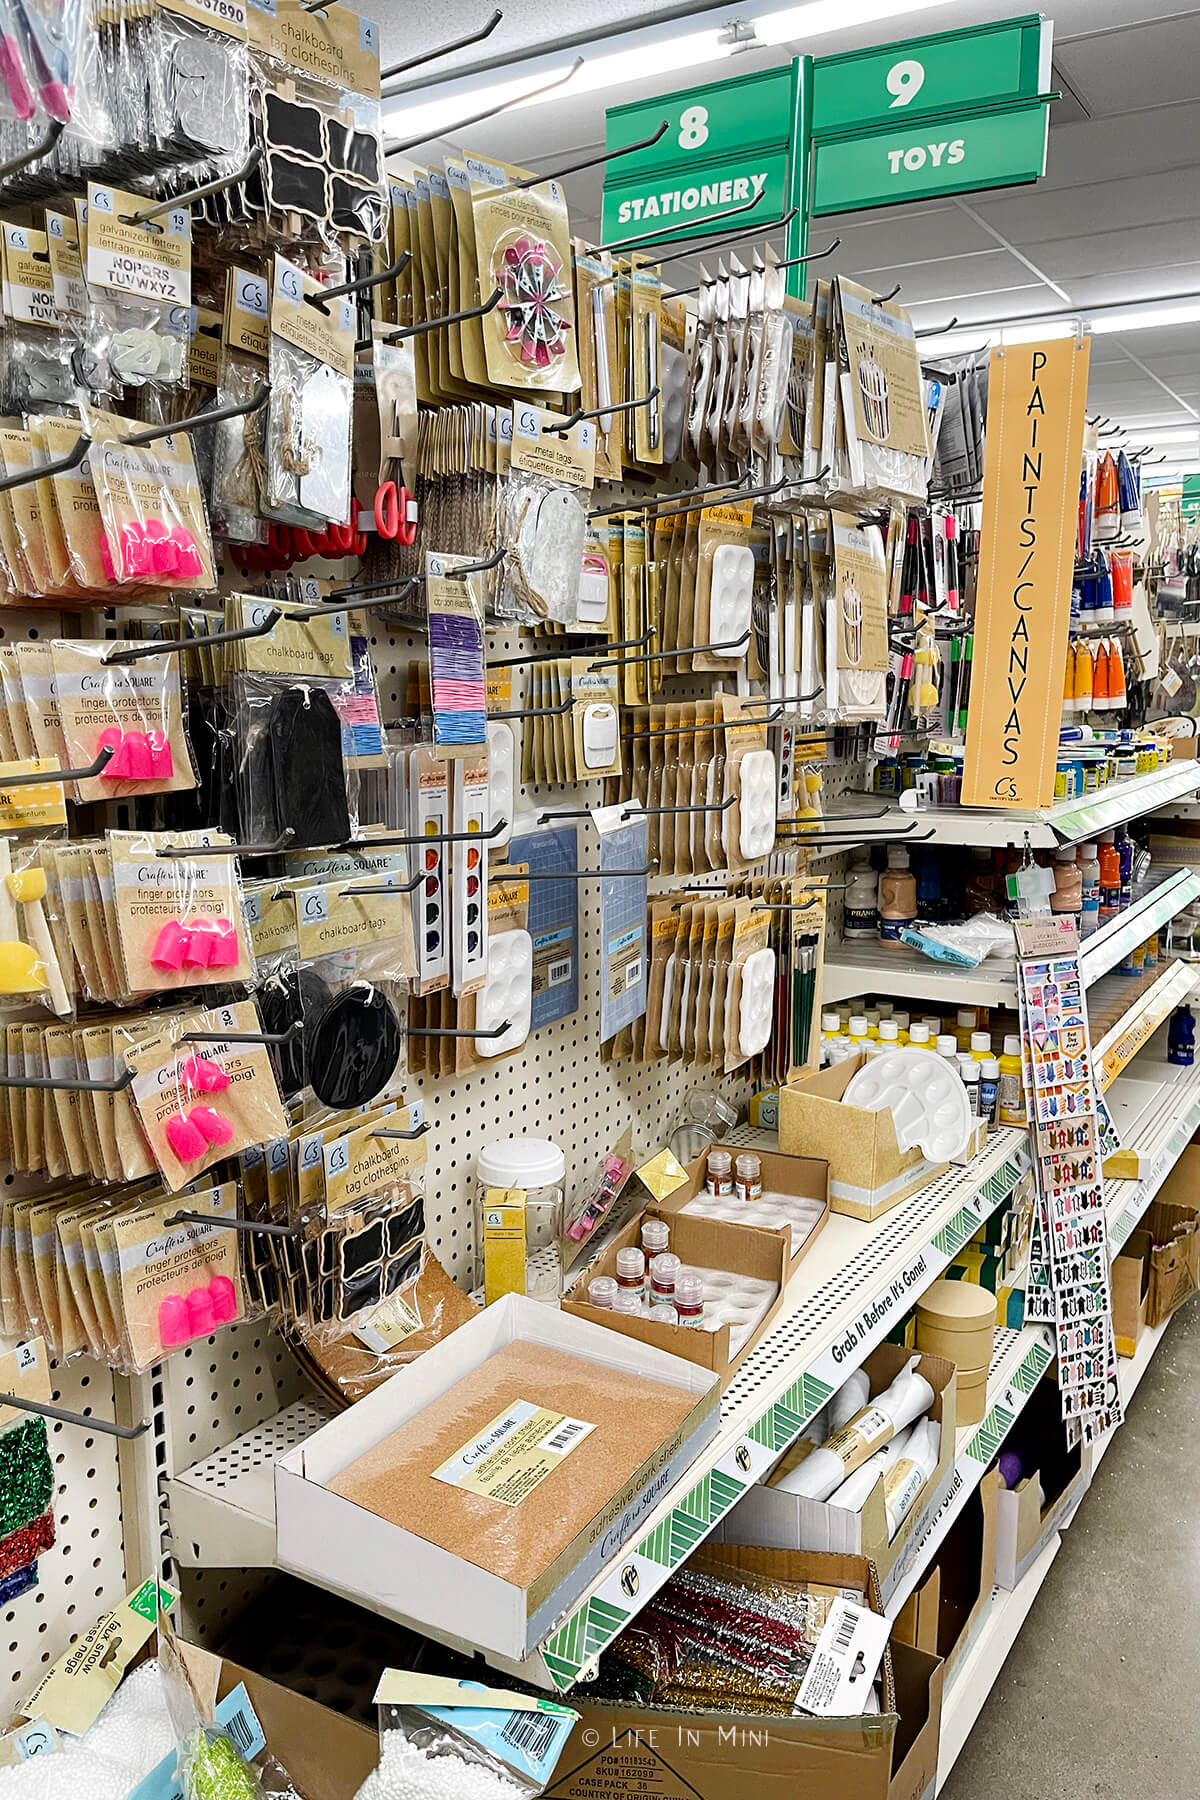 The craft aisle found at The Dollar Tree